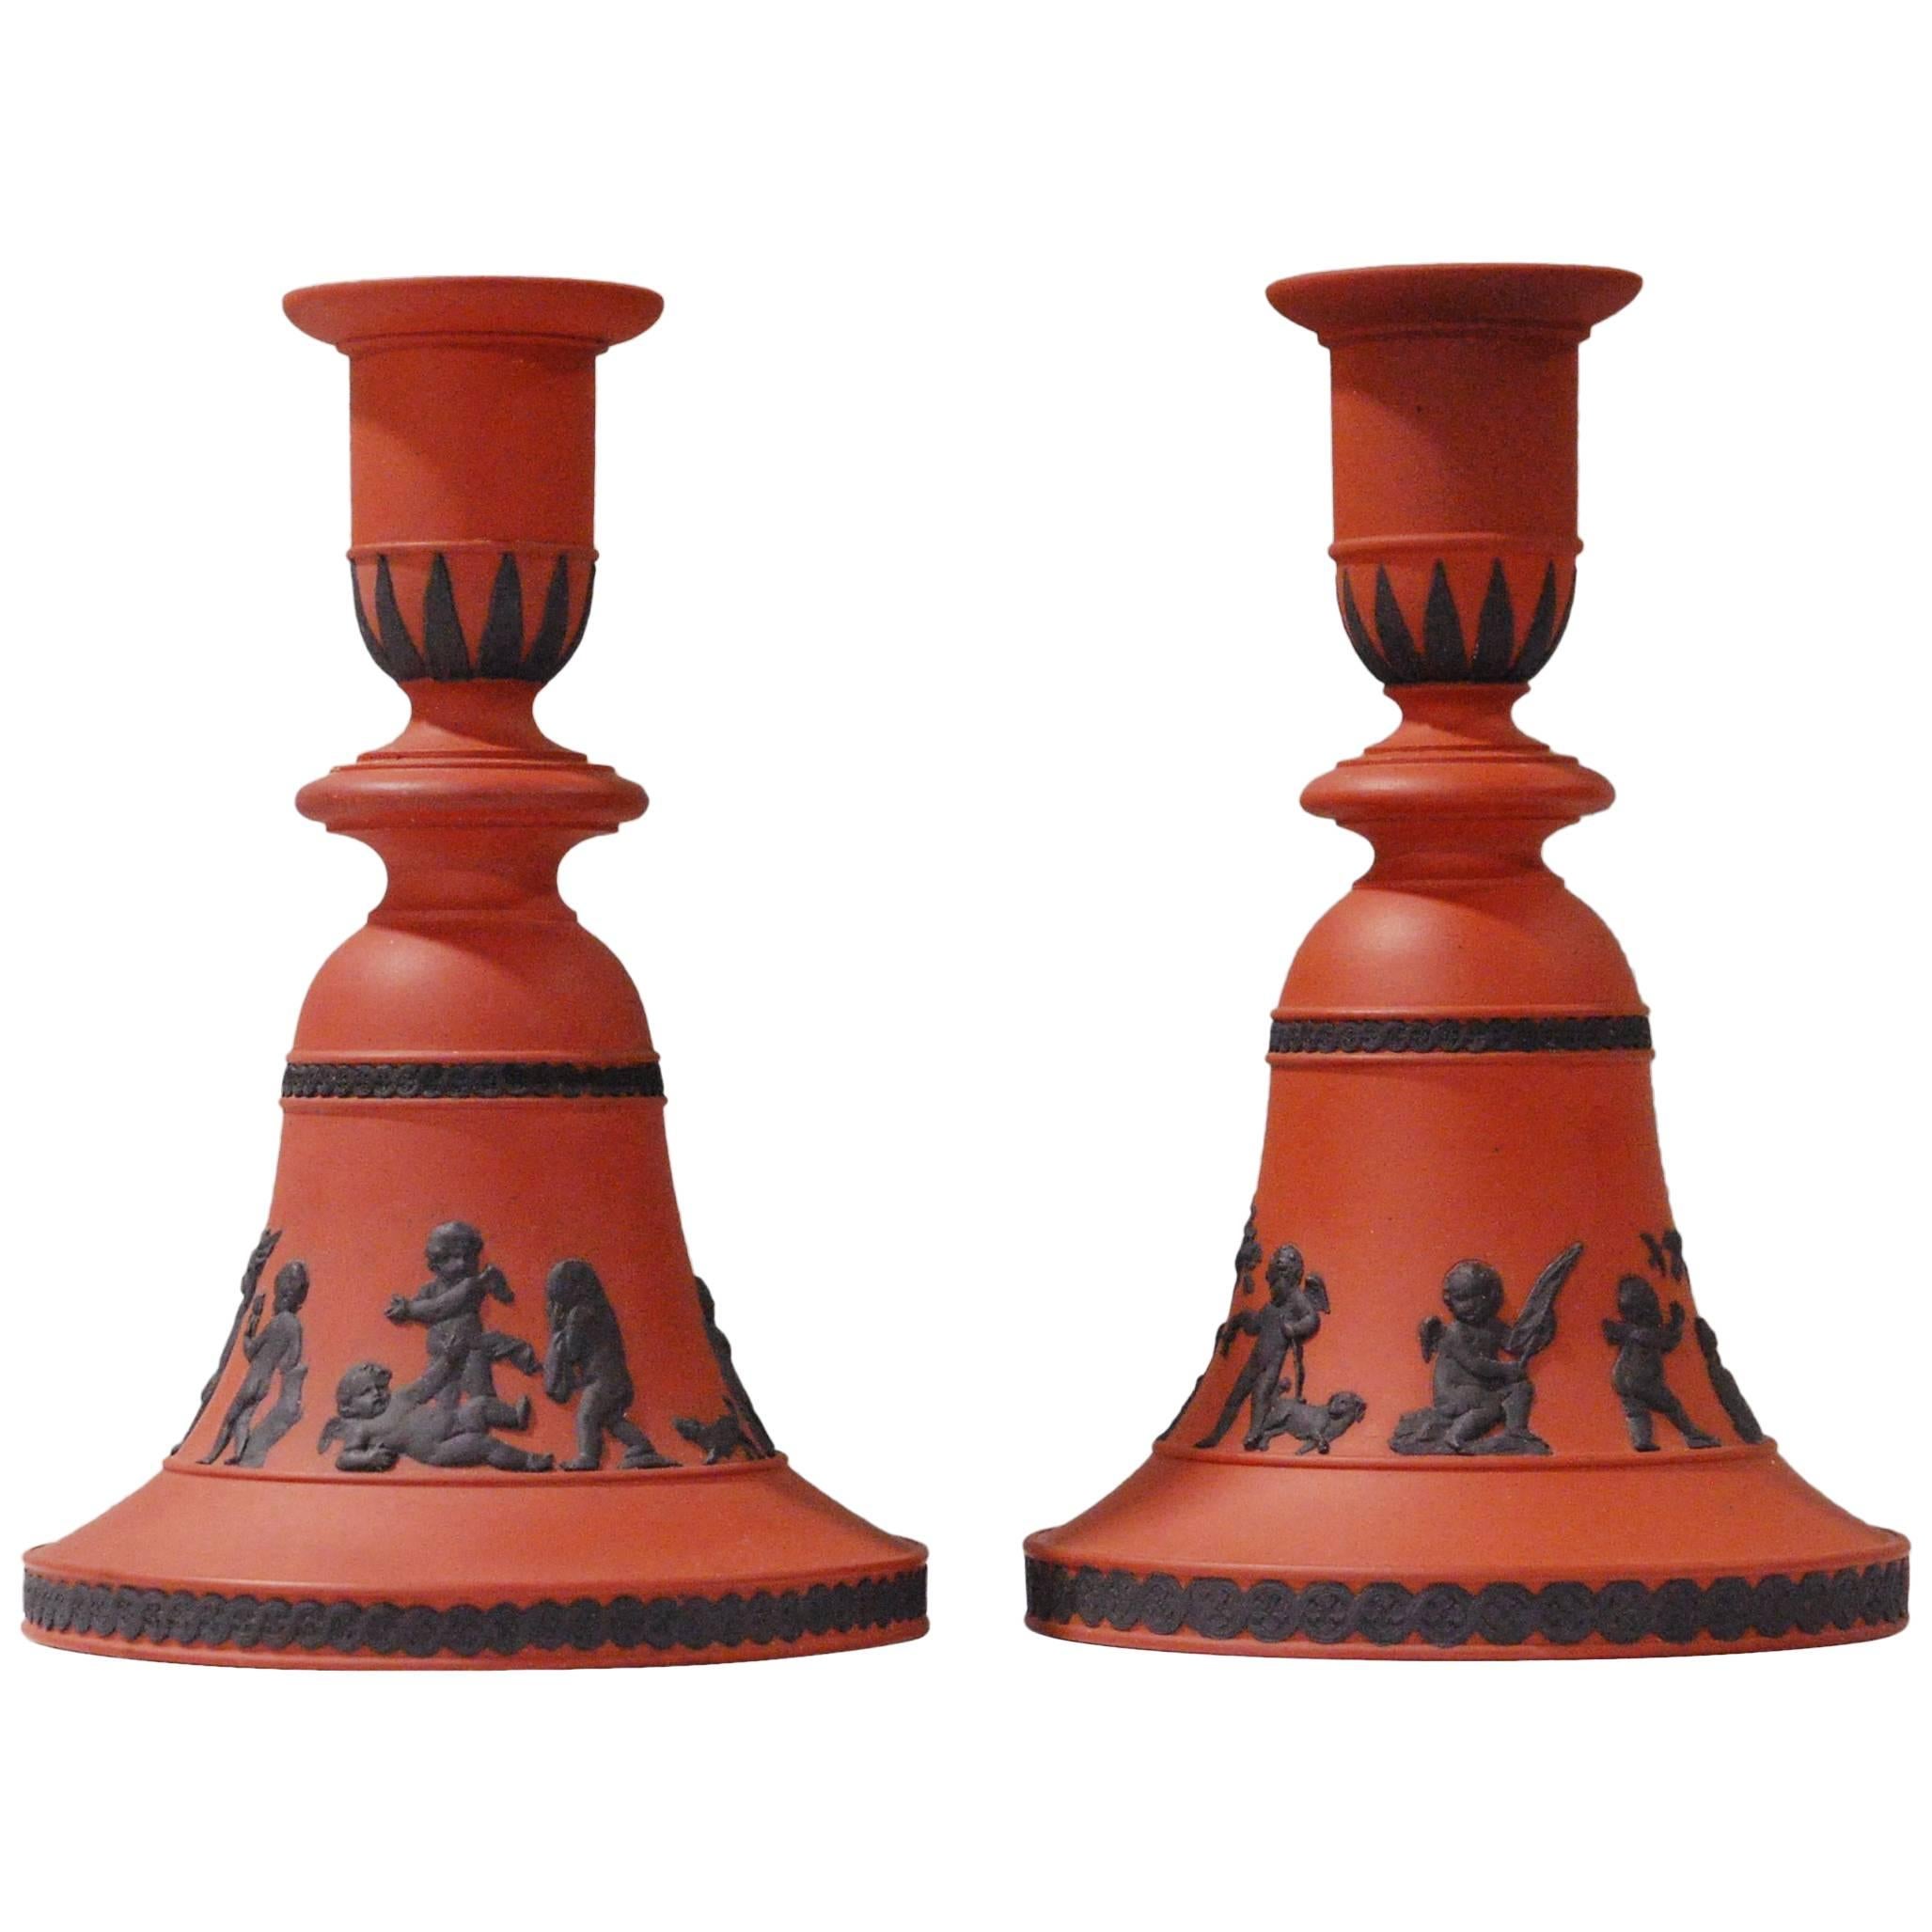 Pair of Rosso Antico Candlesticks, Wedgwood, circa 1820 For Sale